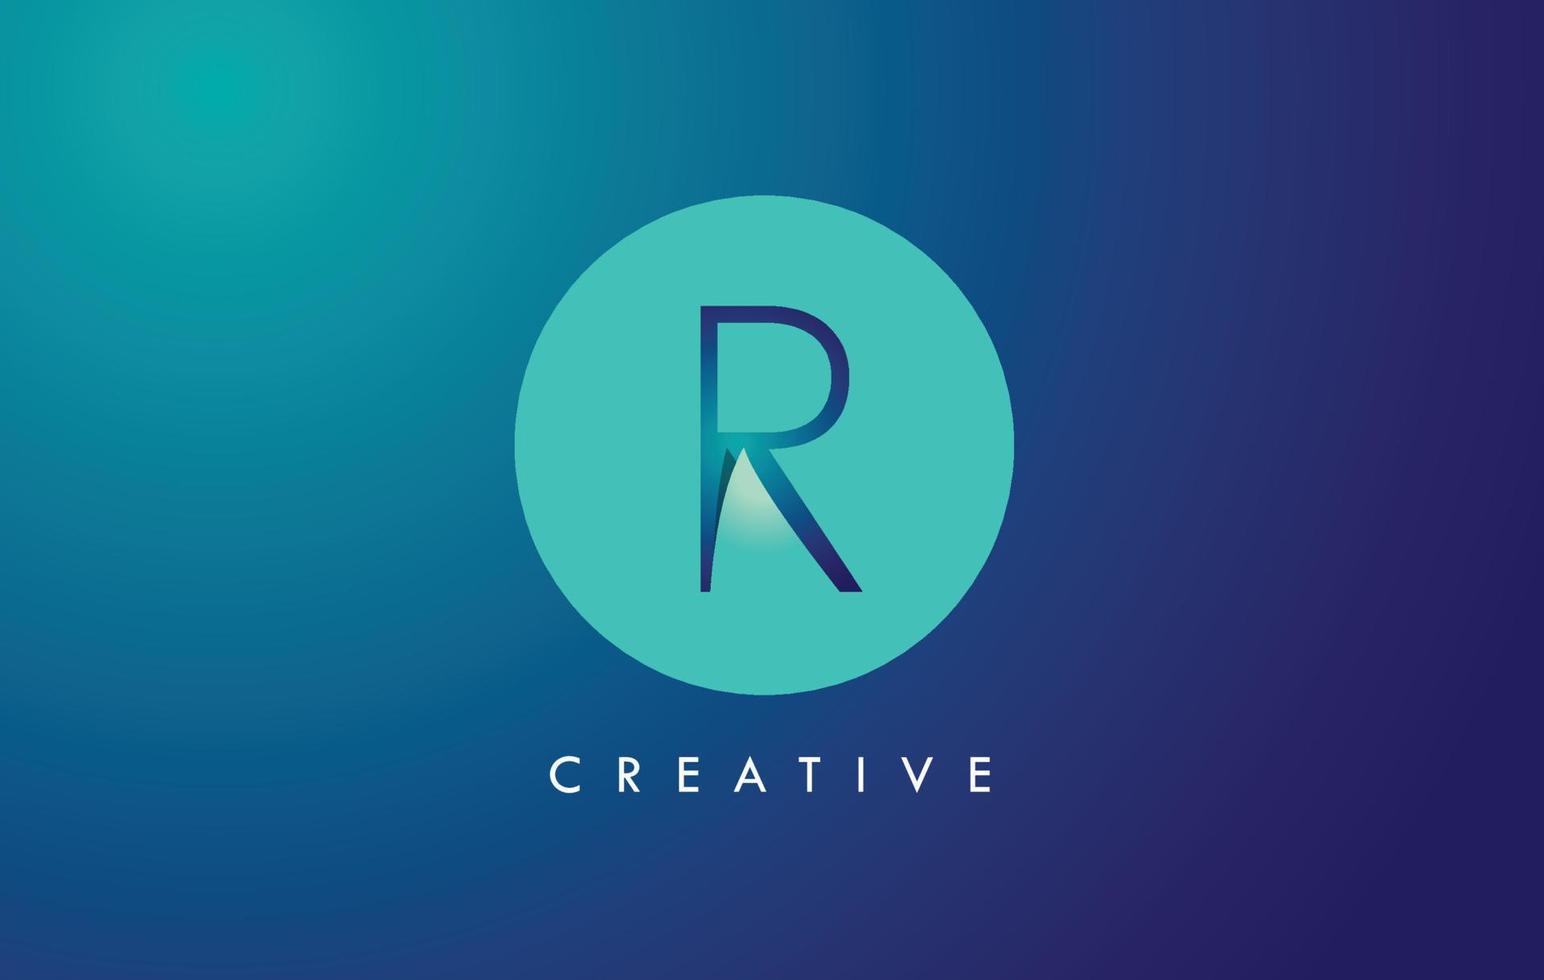 R Letter Logo Icon Design With Paper Cut Creative Look Vector Illustration